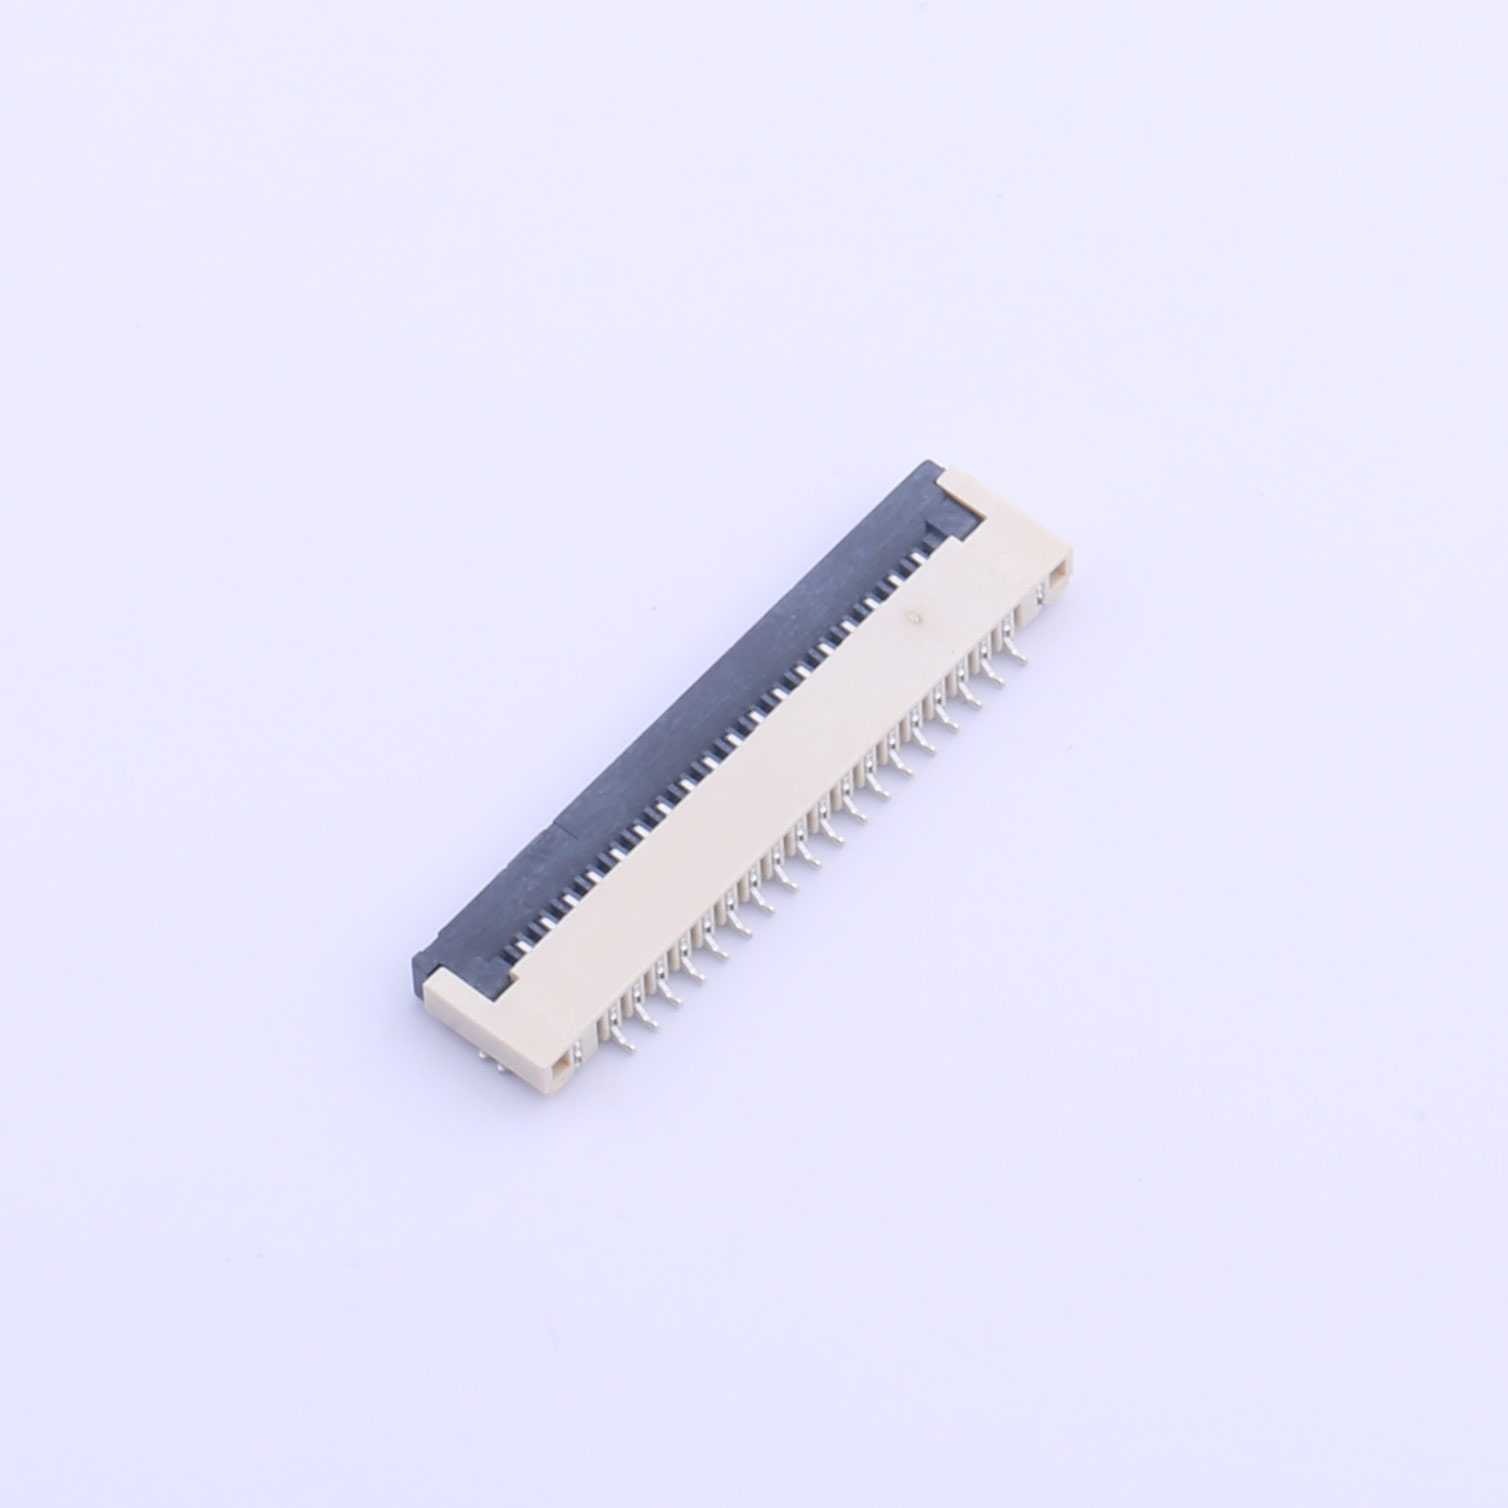 Kinghelm FFC/FPC Connector 18p Pitch 1mm - KH-FG1.0-H2.0-18pin